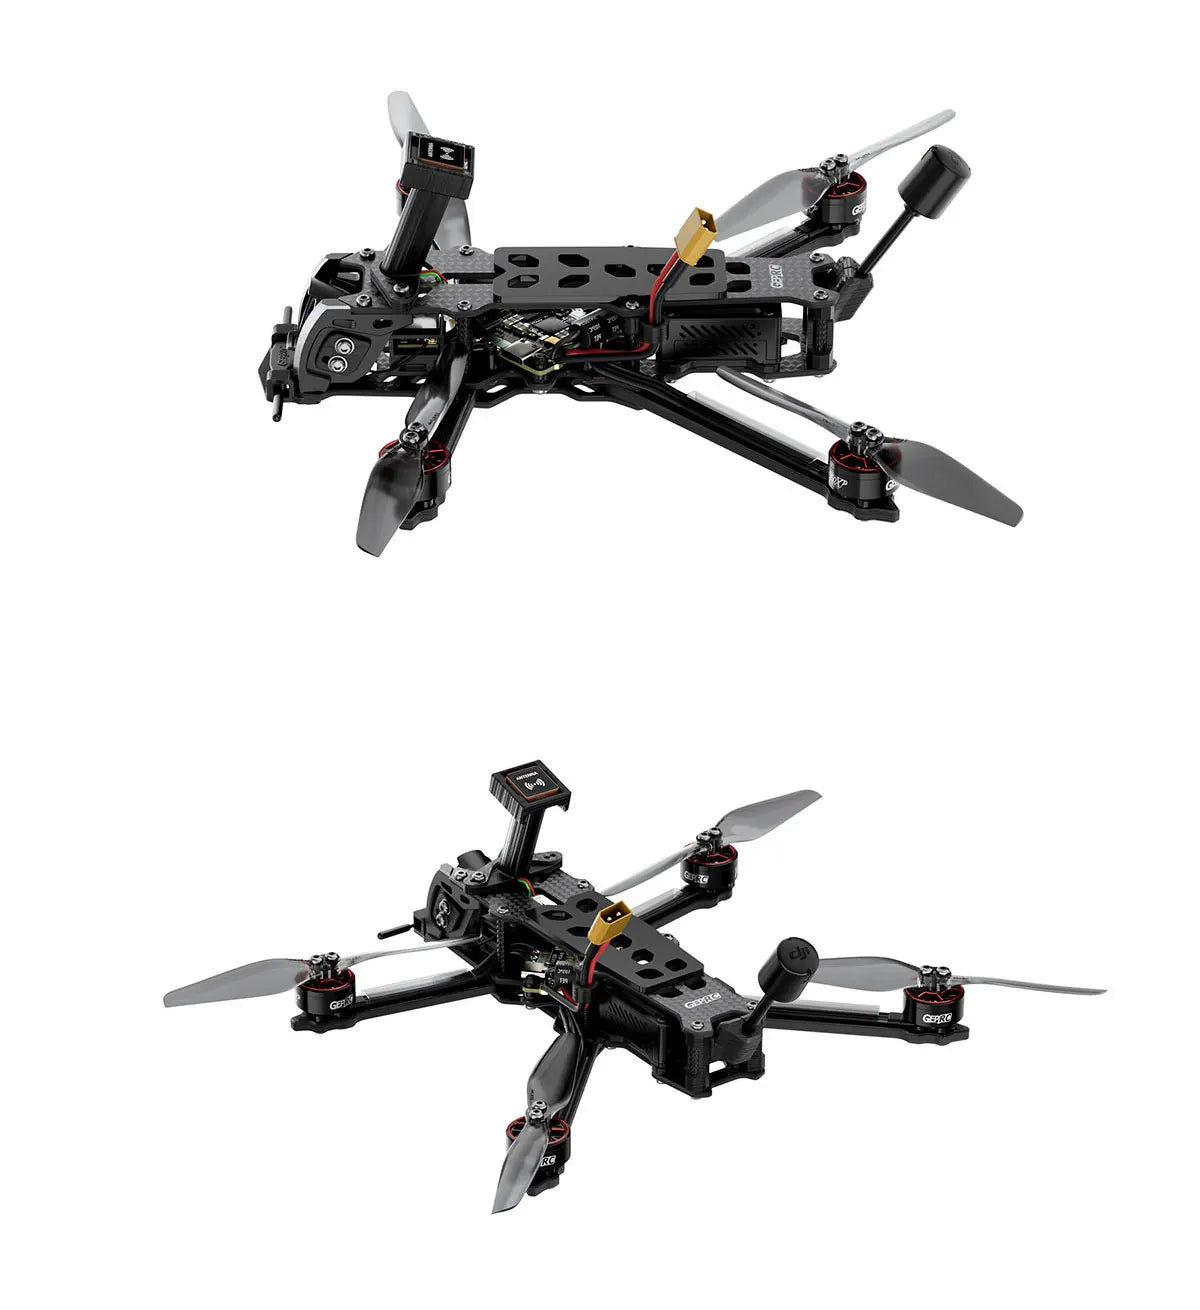 GEPRC Tern-LR40 Analog Long Range FPV, a flight is not only a high-quality flight, but also an artistic journey